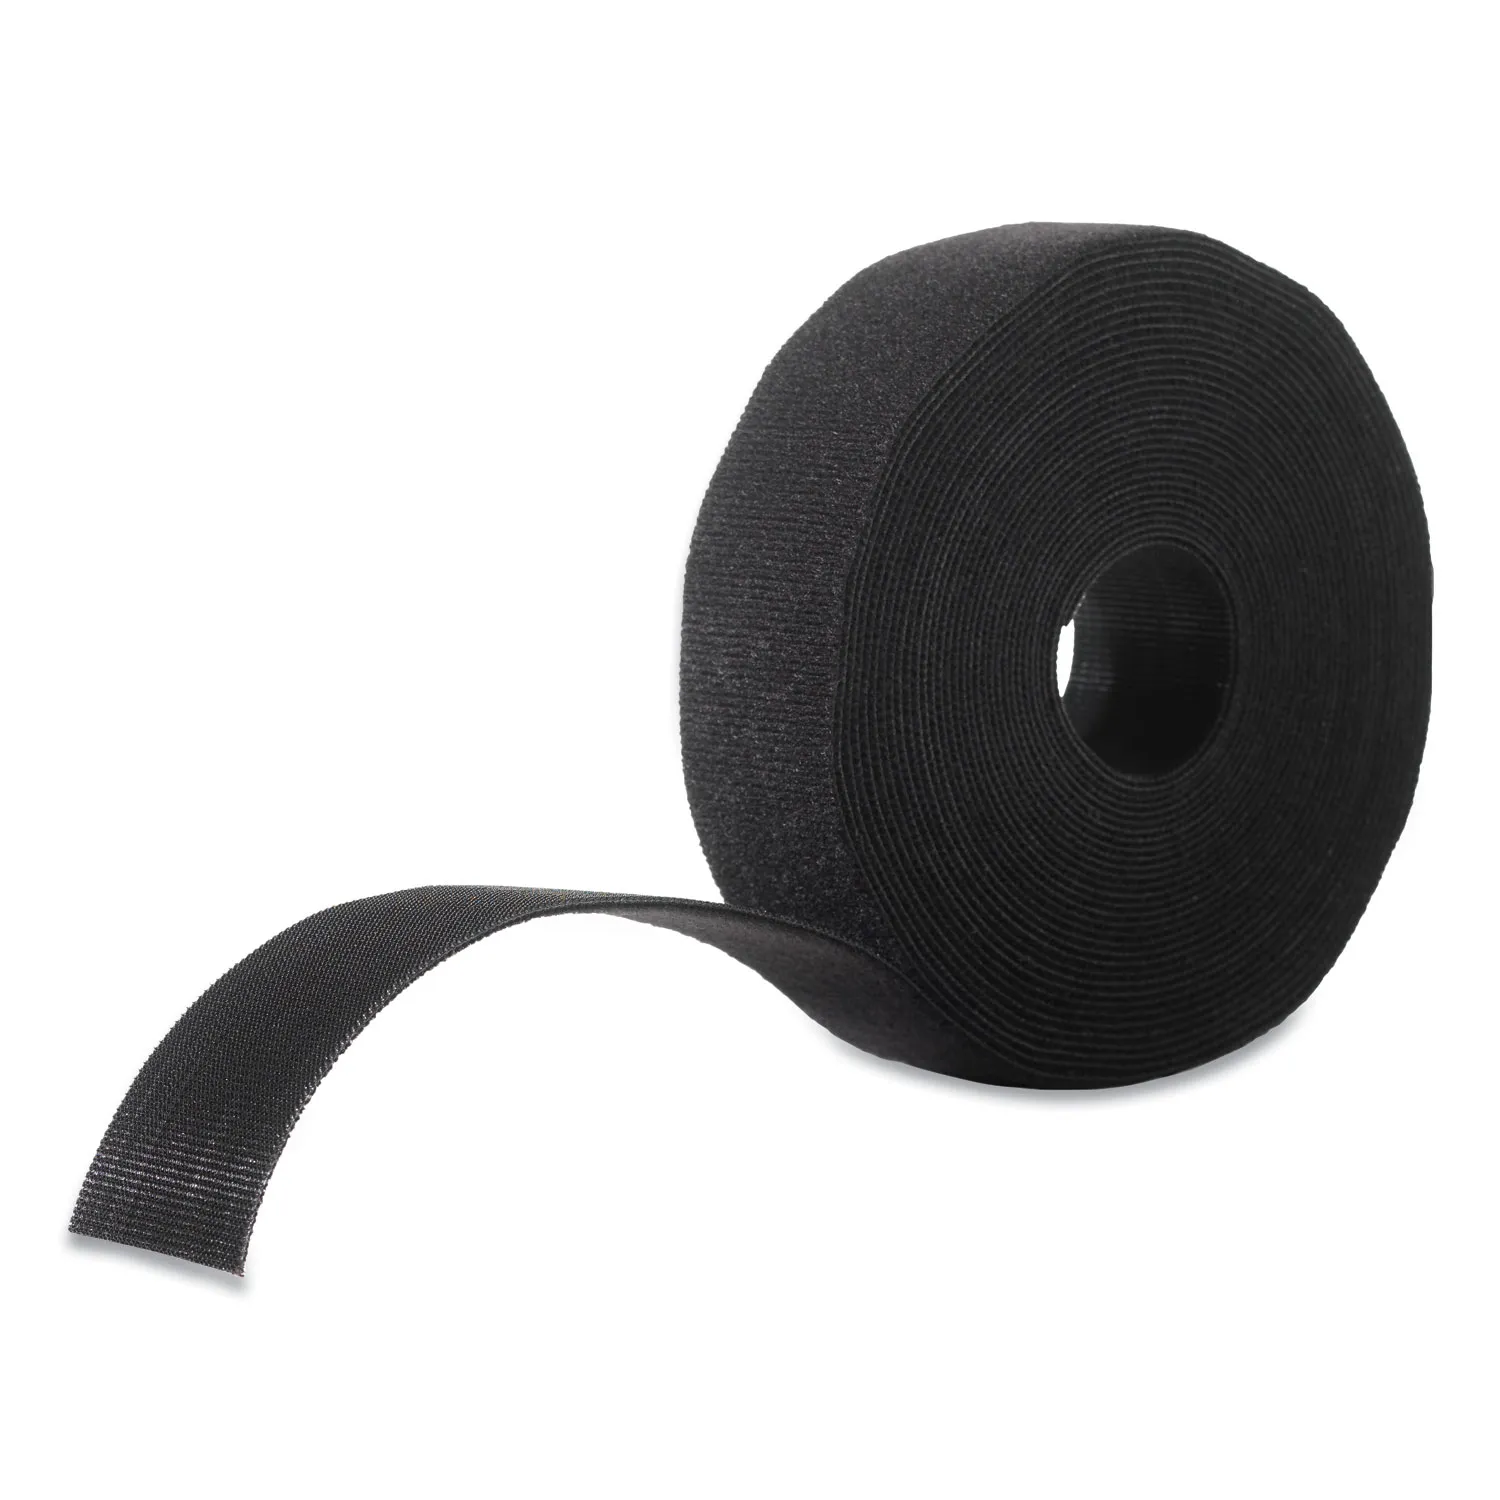 VELCRO® Brand Reusable ONE-WRAP® Strap Double Sided Hook & Loop 1.5 x 5ft  Black 